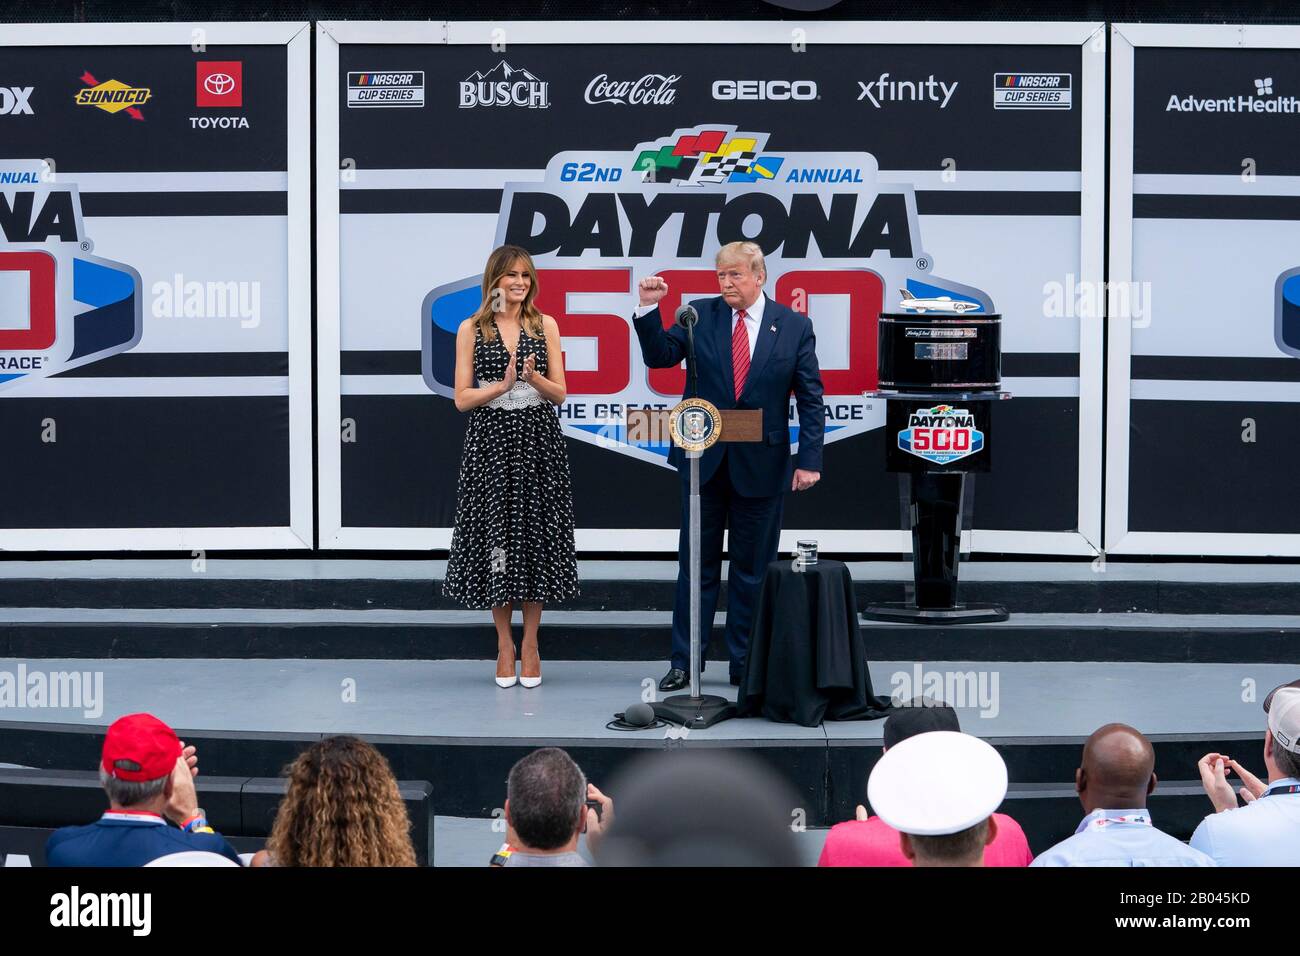 U.S President Donald Trump delivers remarks as First Lady Melania Trump looks on at Daytona International Speedway February 16, 2020 in Daytona Beach, Florida. Trump served as the official starter of the the NASCAR Daytona 500 auto race and took a ride in the presidential limousine around the track. Stock Photo